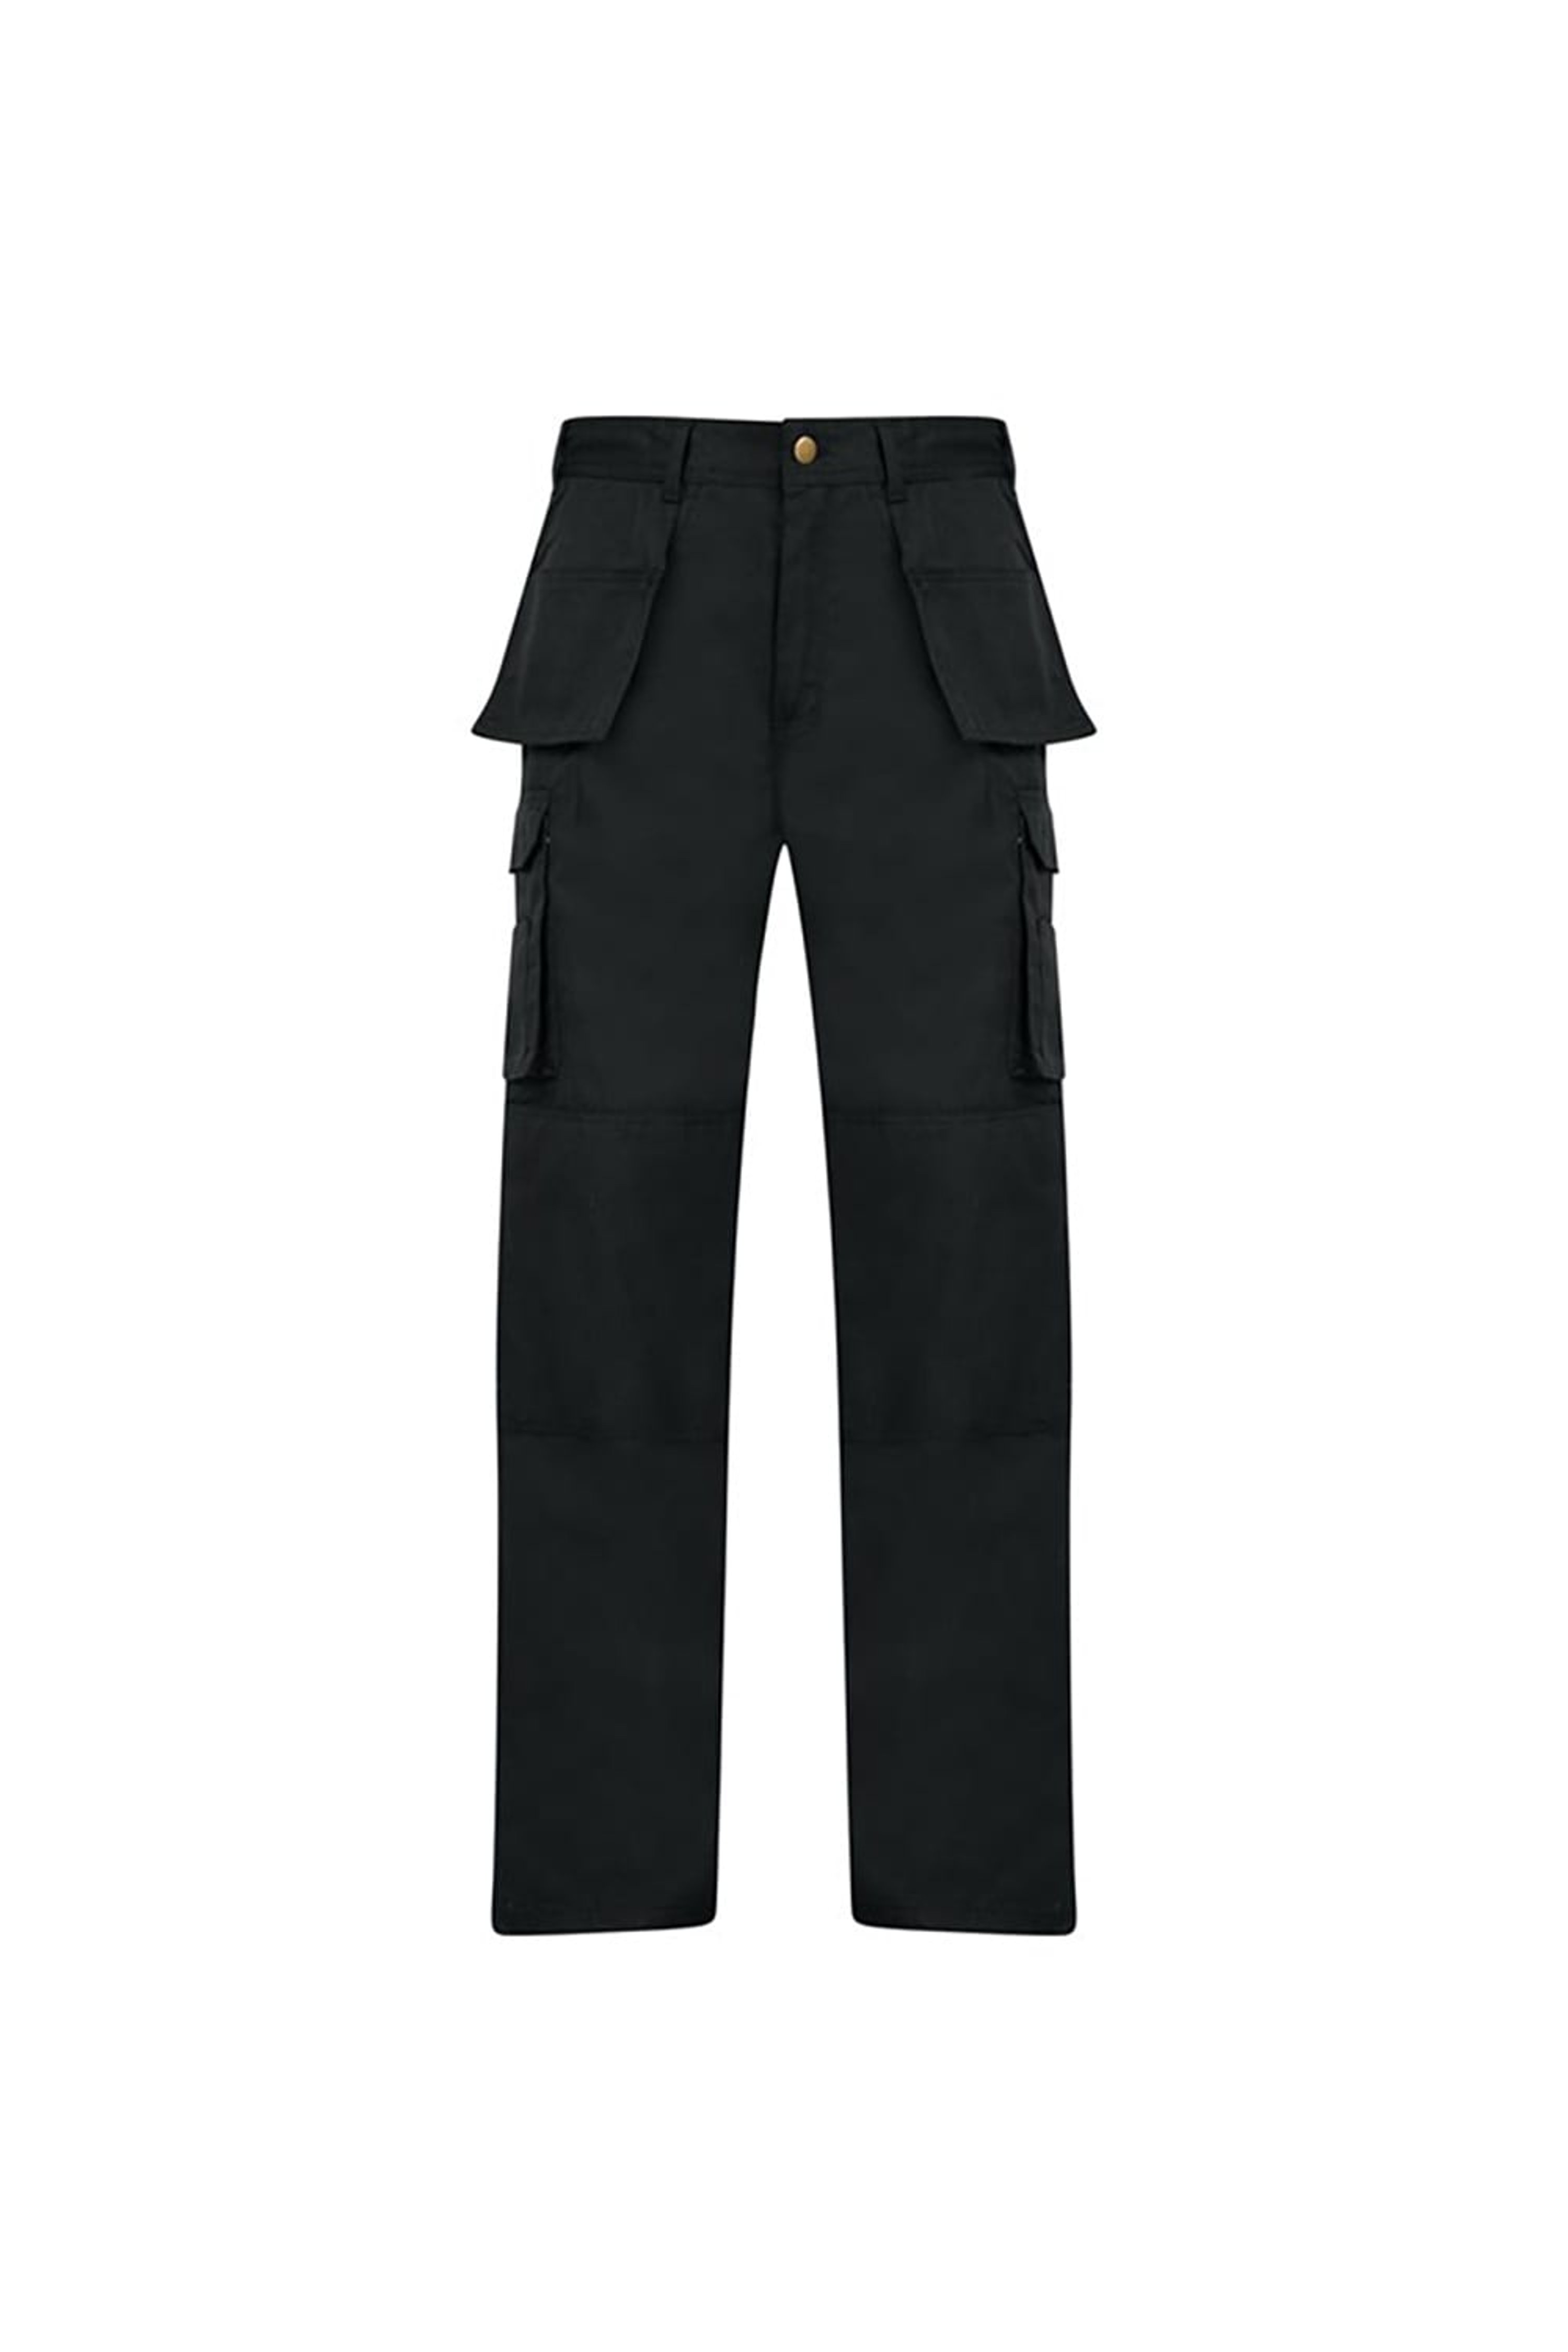 ABSOLUTE APPAREL ABSOLUTE APPAREL MENS WORKWEAR UTILITY CARGO TROUSER